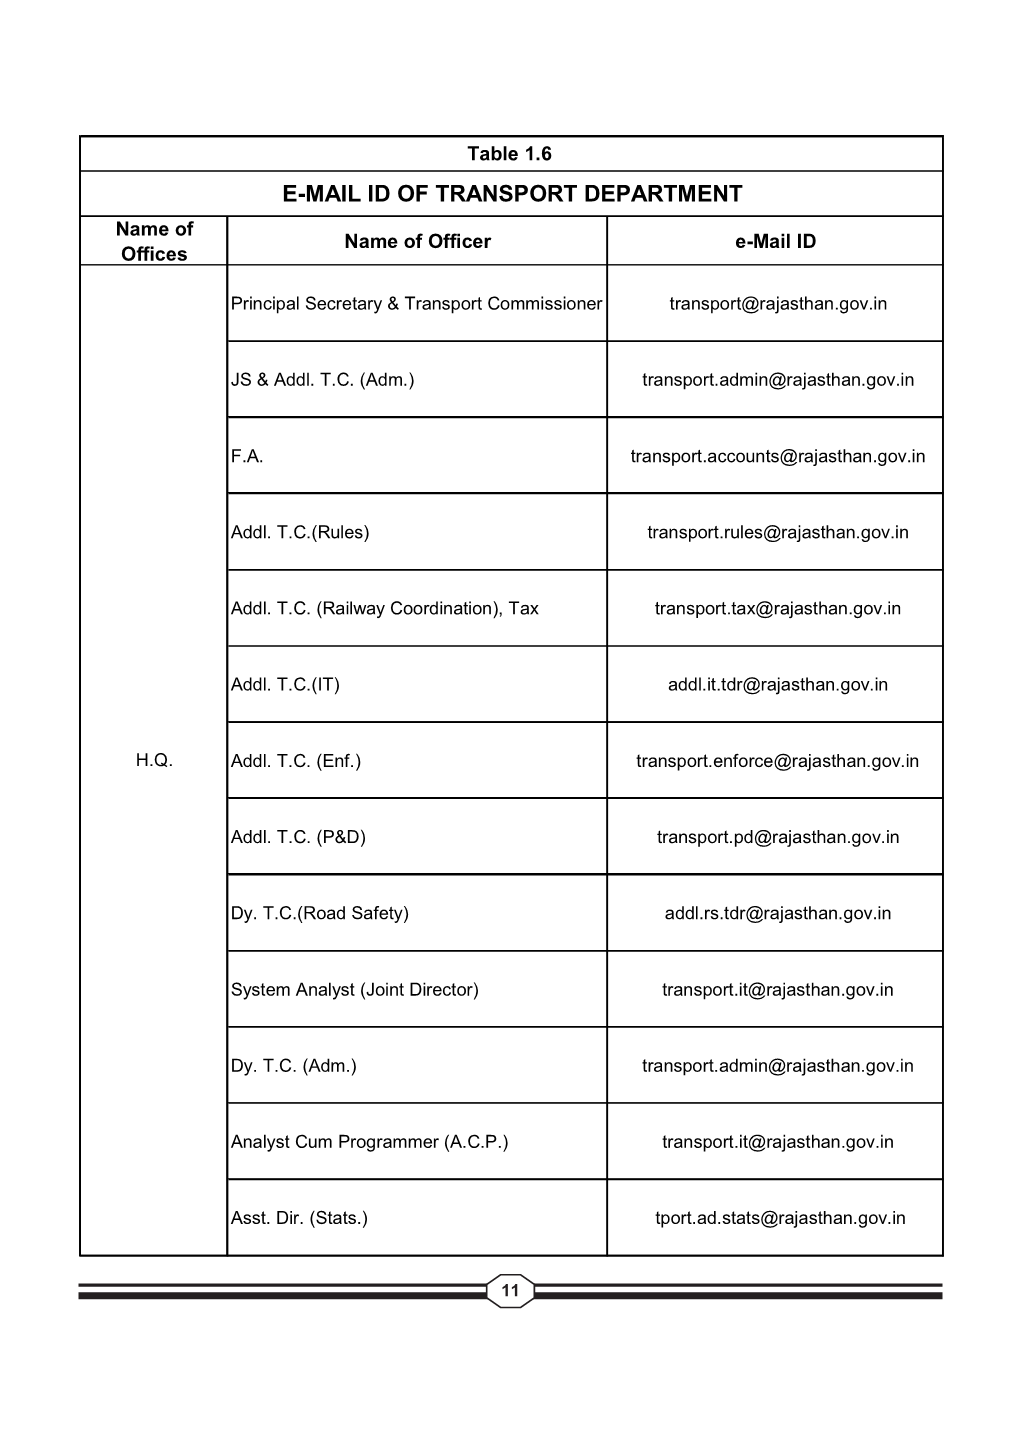 E-MAIL ID of TRANSPORT DEPARTMENT Name of Name of Officer E-Mail ID Offices